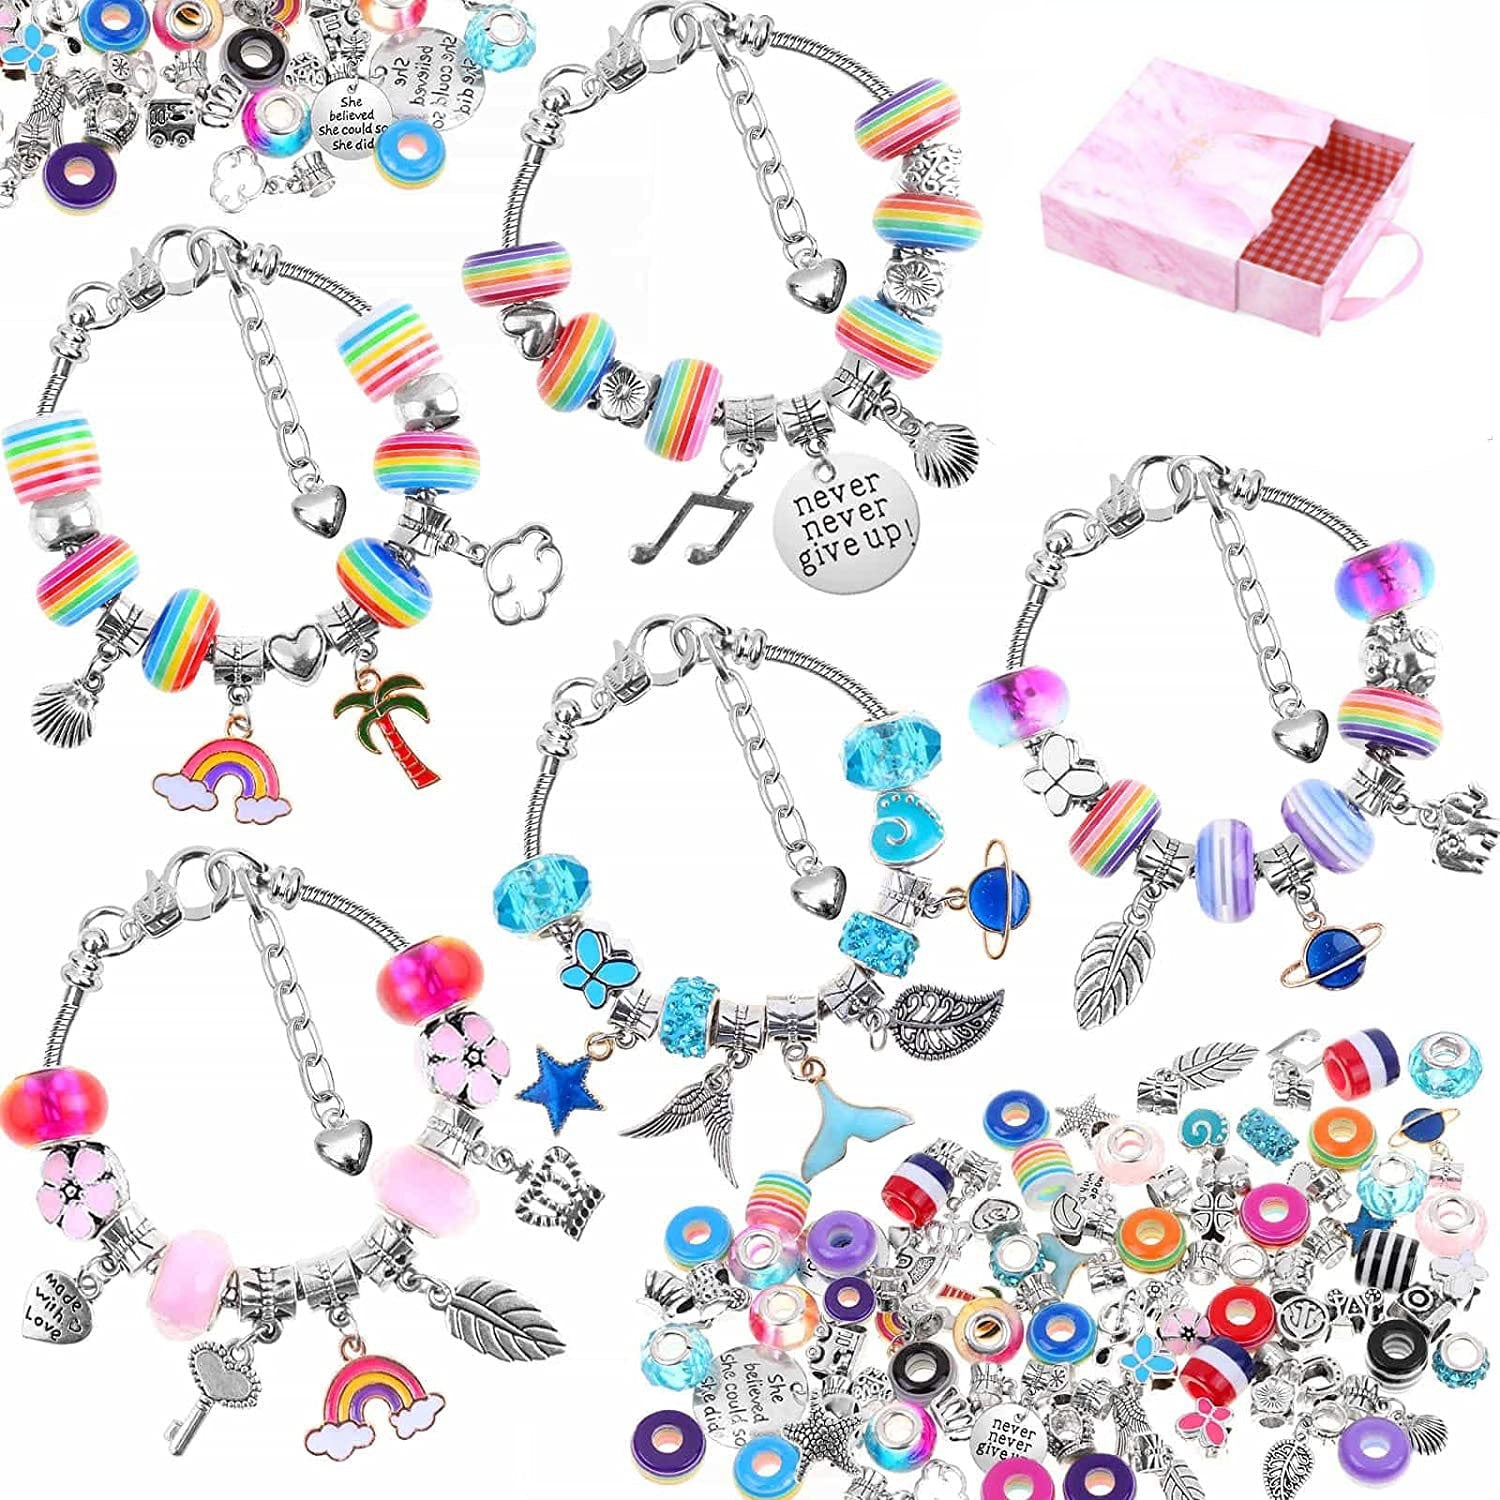 Bracelet Making Kit 130 Pcs DIY Jewelry Making Kit Children DIY Handmade Toy with Bracelet,Pendant,Beads,Charms and Necklace String for Bracelets Craft & Necklace Making,for Teen Girl Gifts Ages 3-13